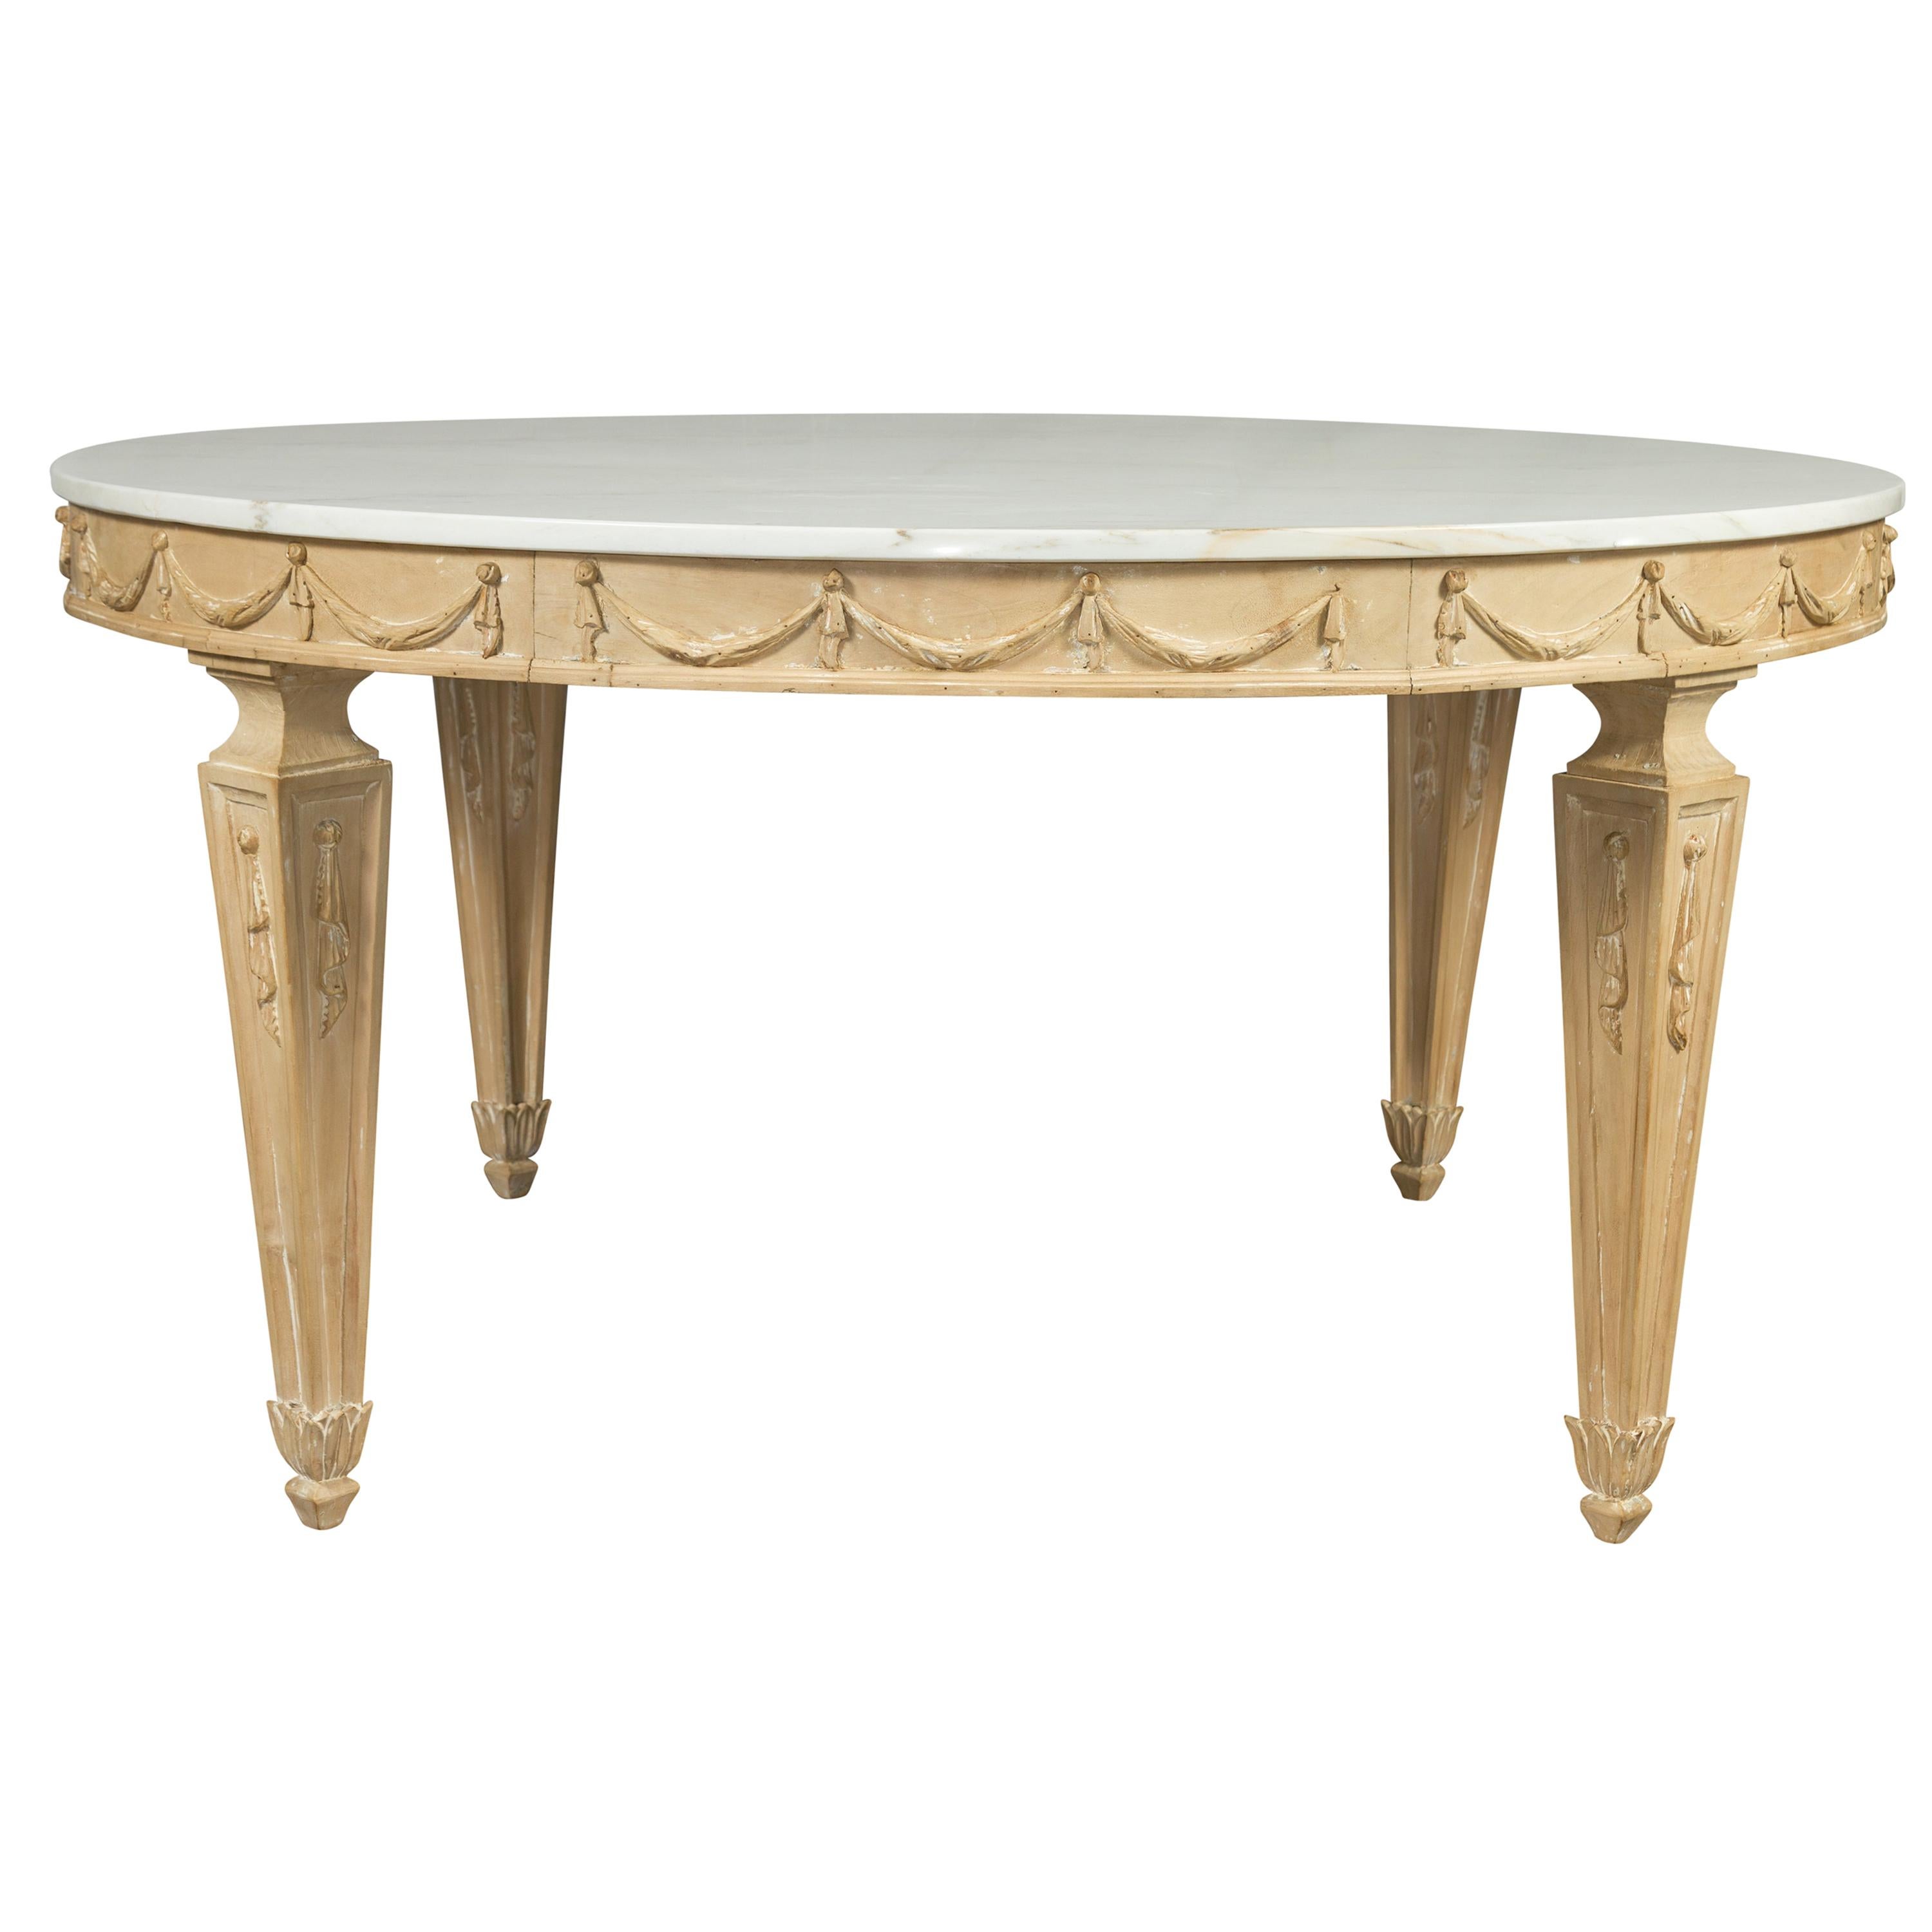 Italian Vintage Neoclassical Style Pine Dining Table with Marble Top and Swags For Sale